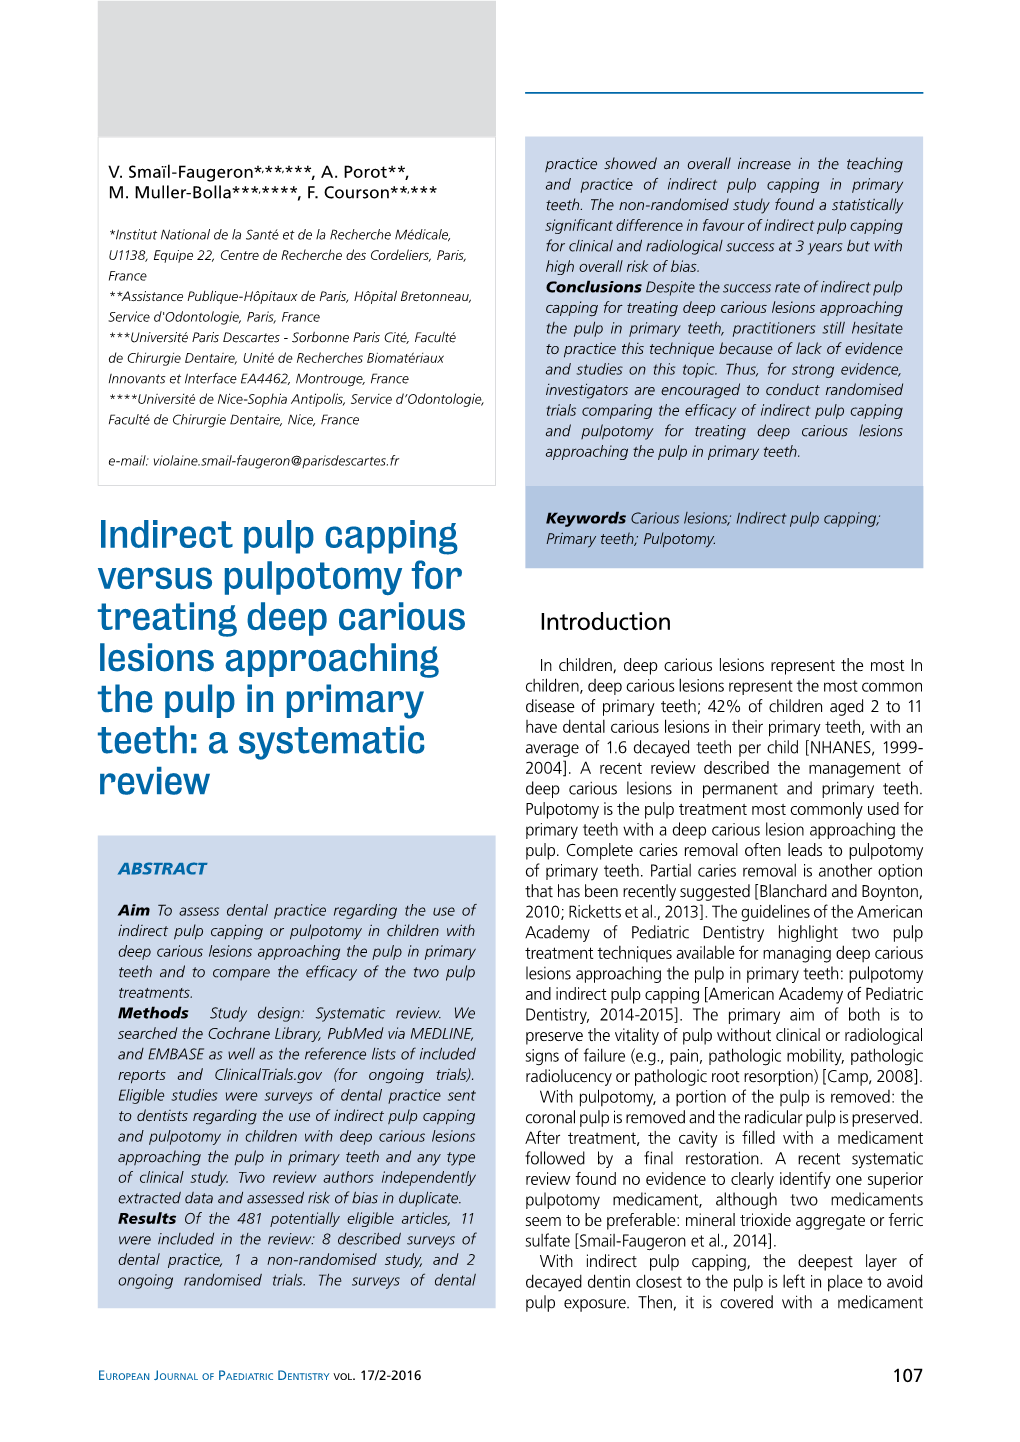 Indirect Pulp Capping Versus Pulpotomy for Treating Deep Carious